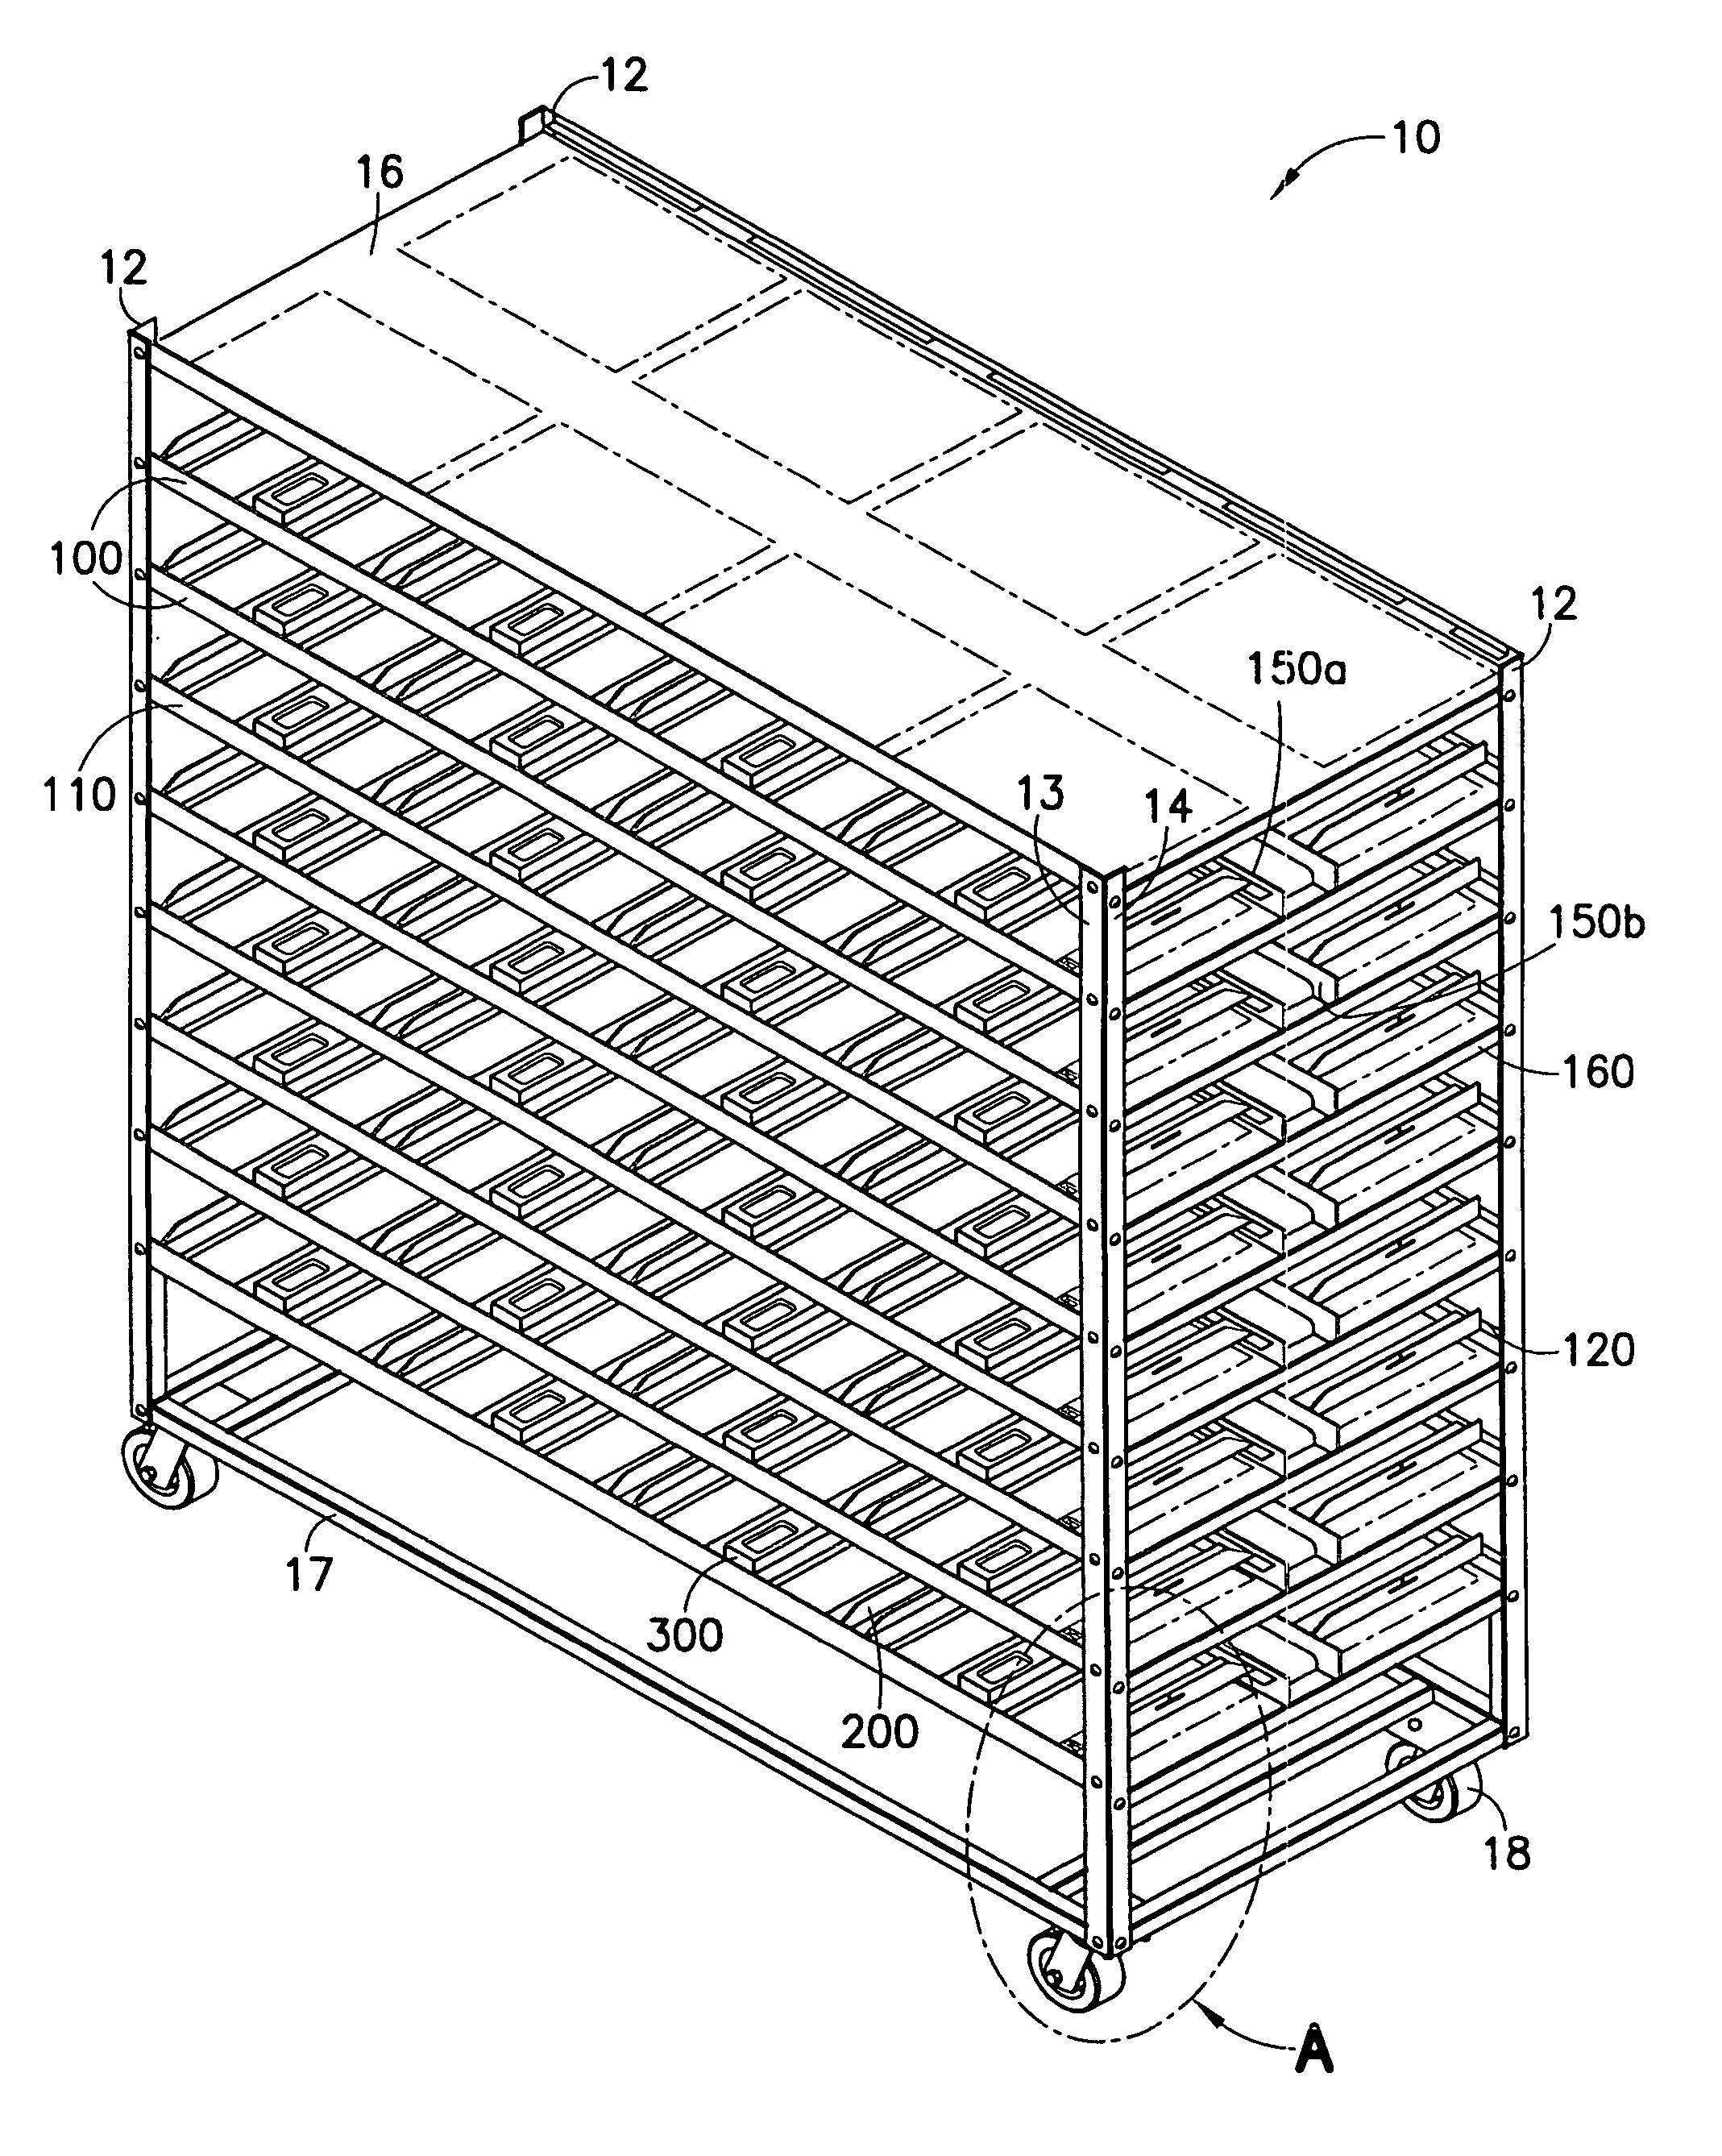 Rack system for housing animals in cages having different widths